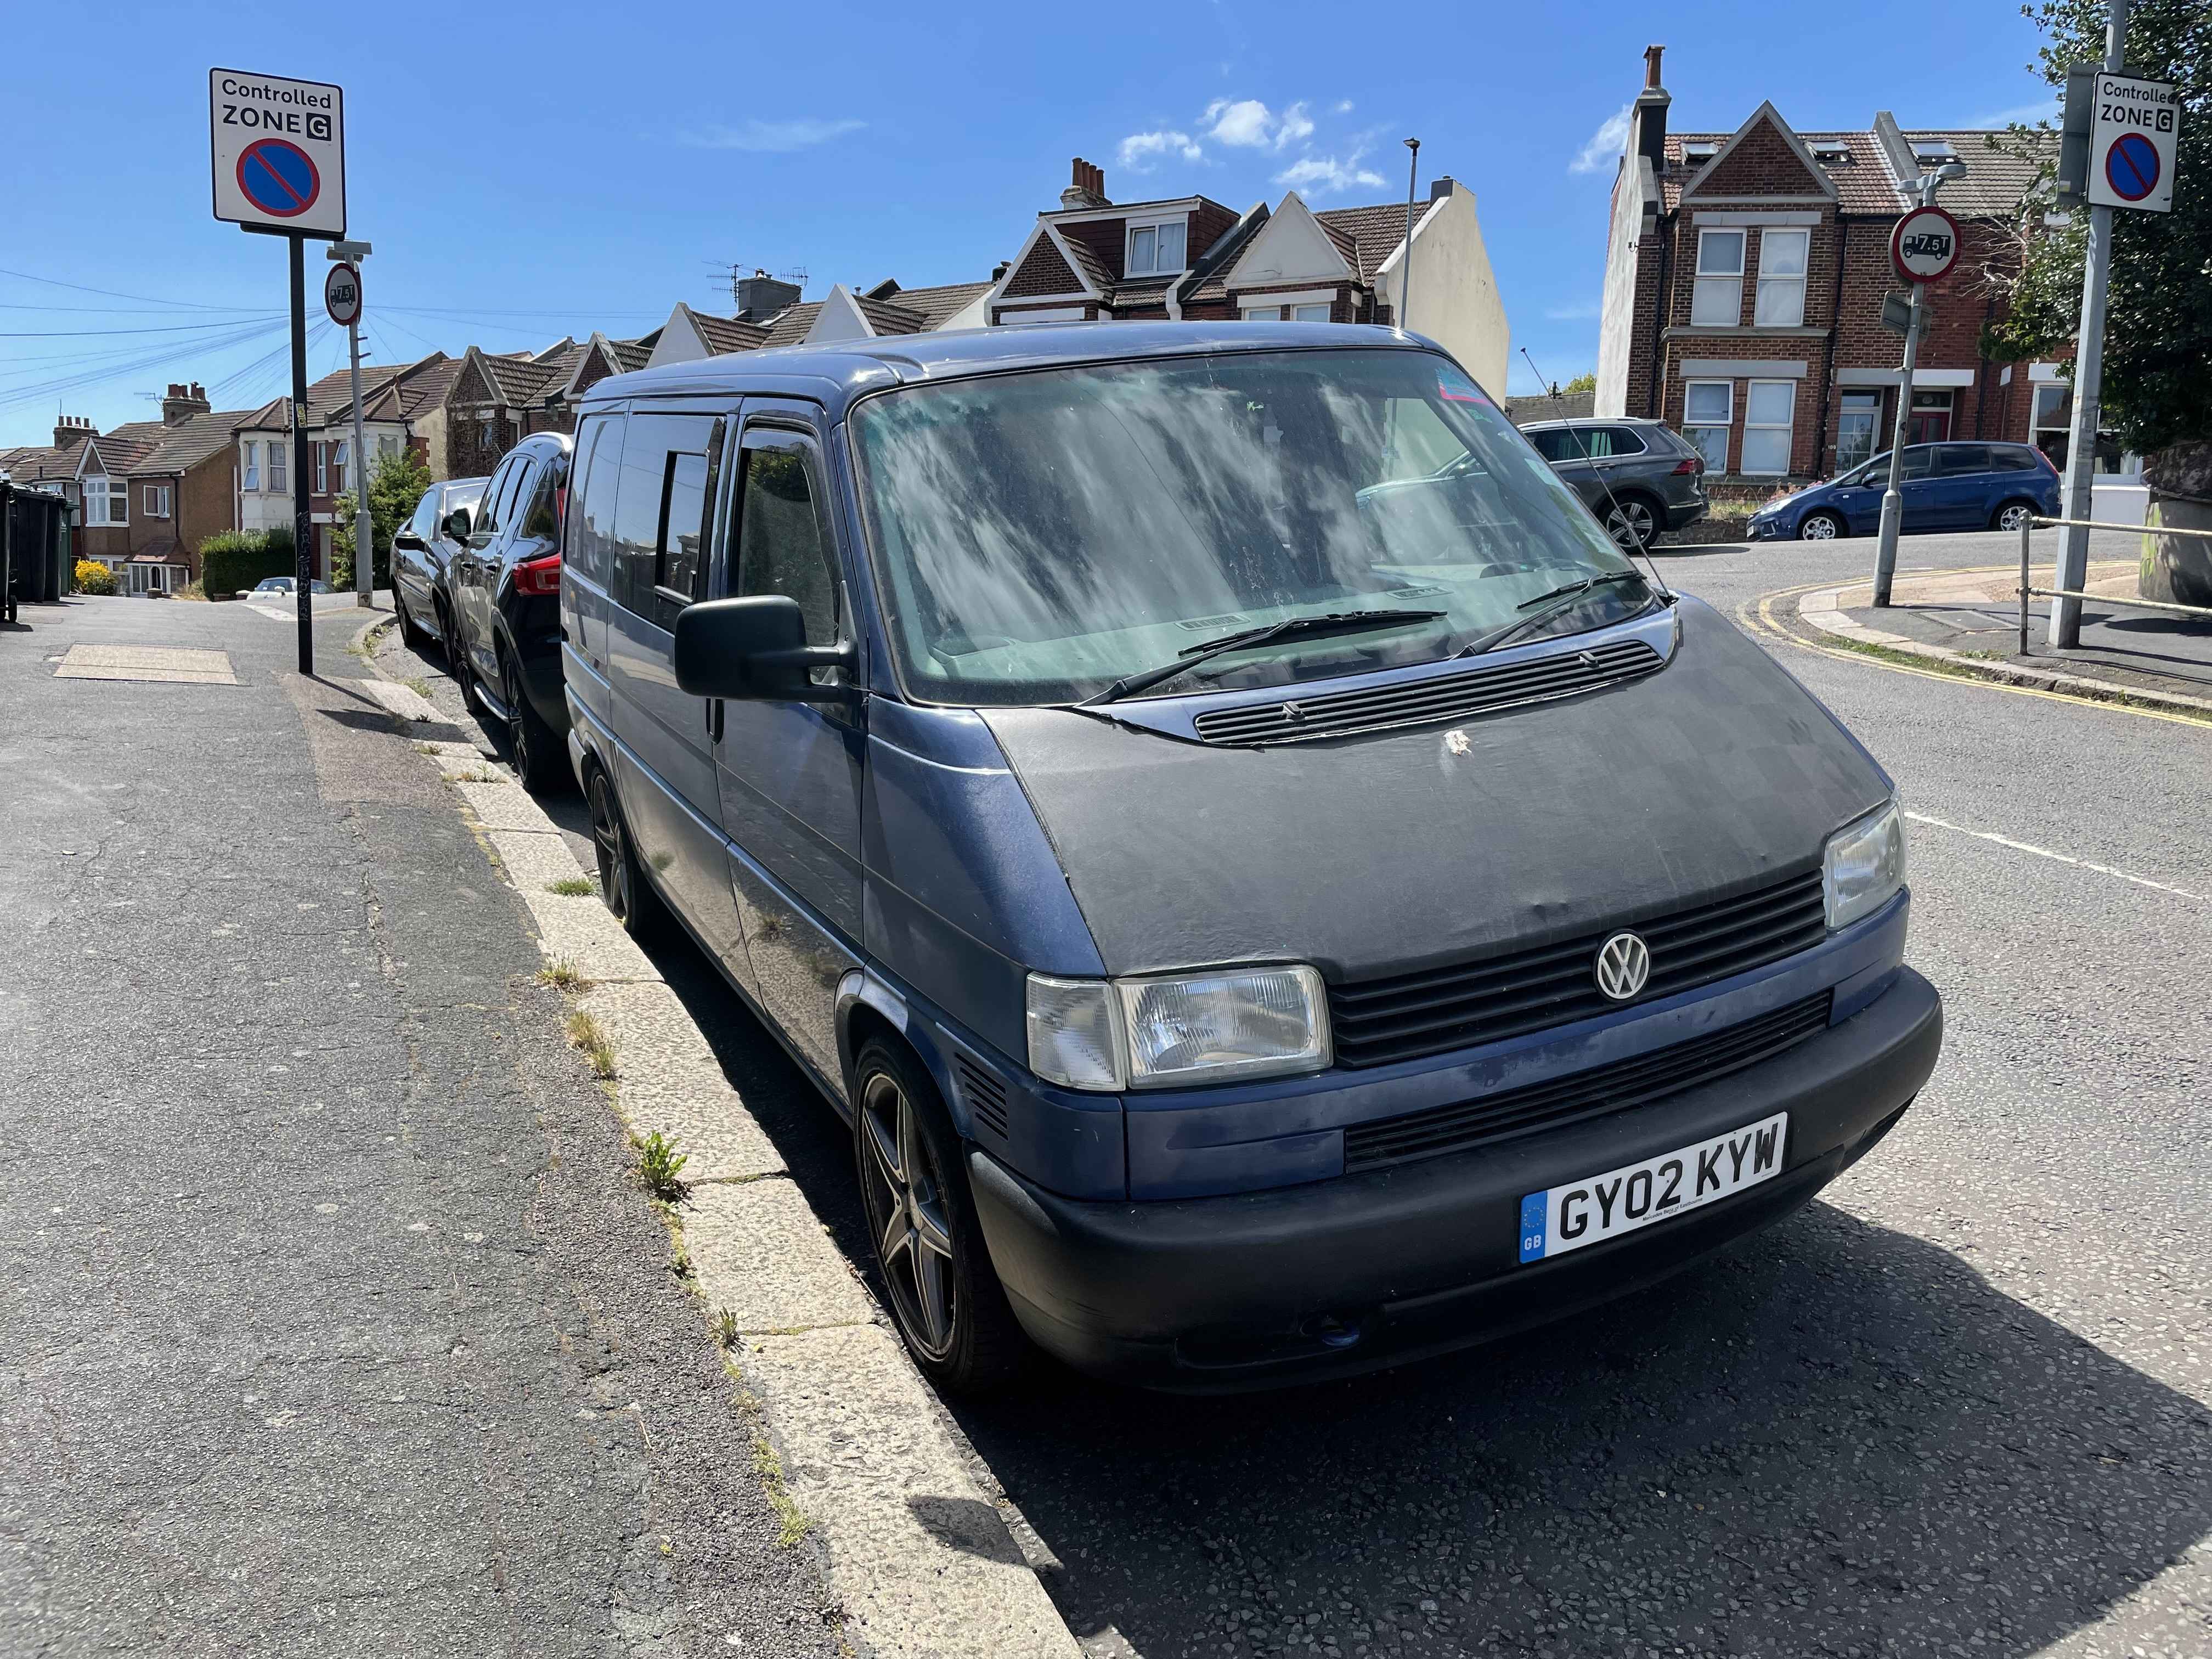 Photograph of GY02 KYW - a Blue Volkswagen Transporter camper van parked in Hollingdean by a non-resident. The fourth of eighteen photographs supplied by the residents of Hollingdean.